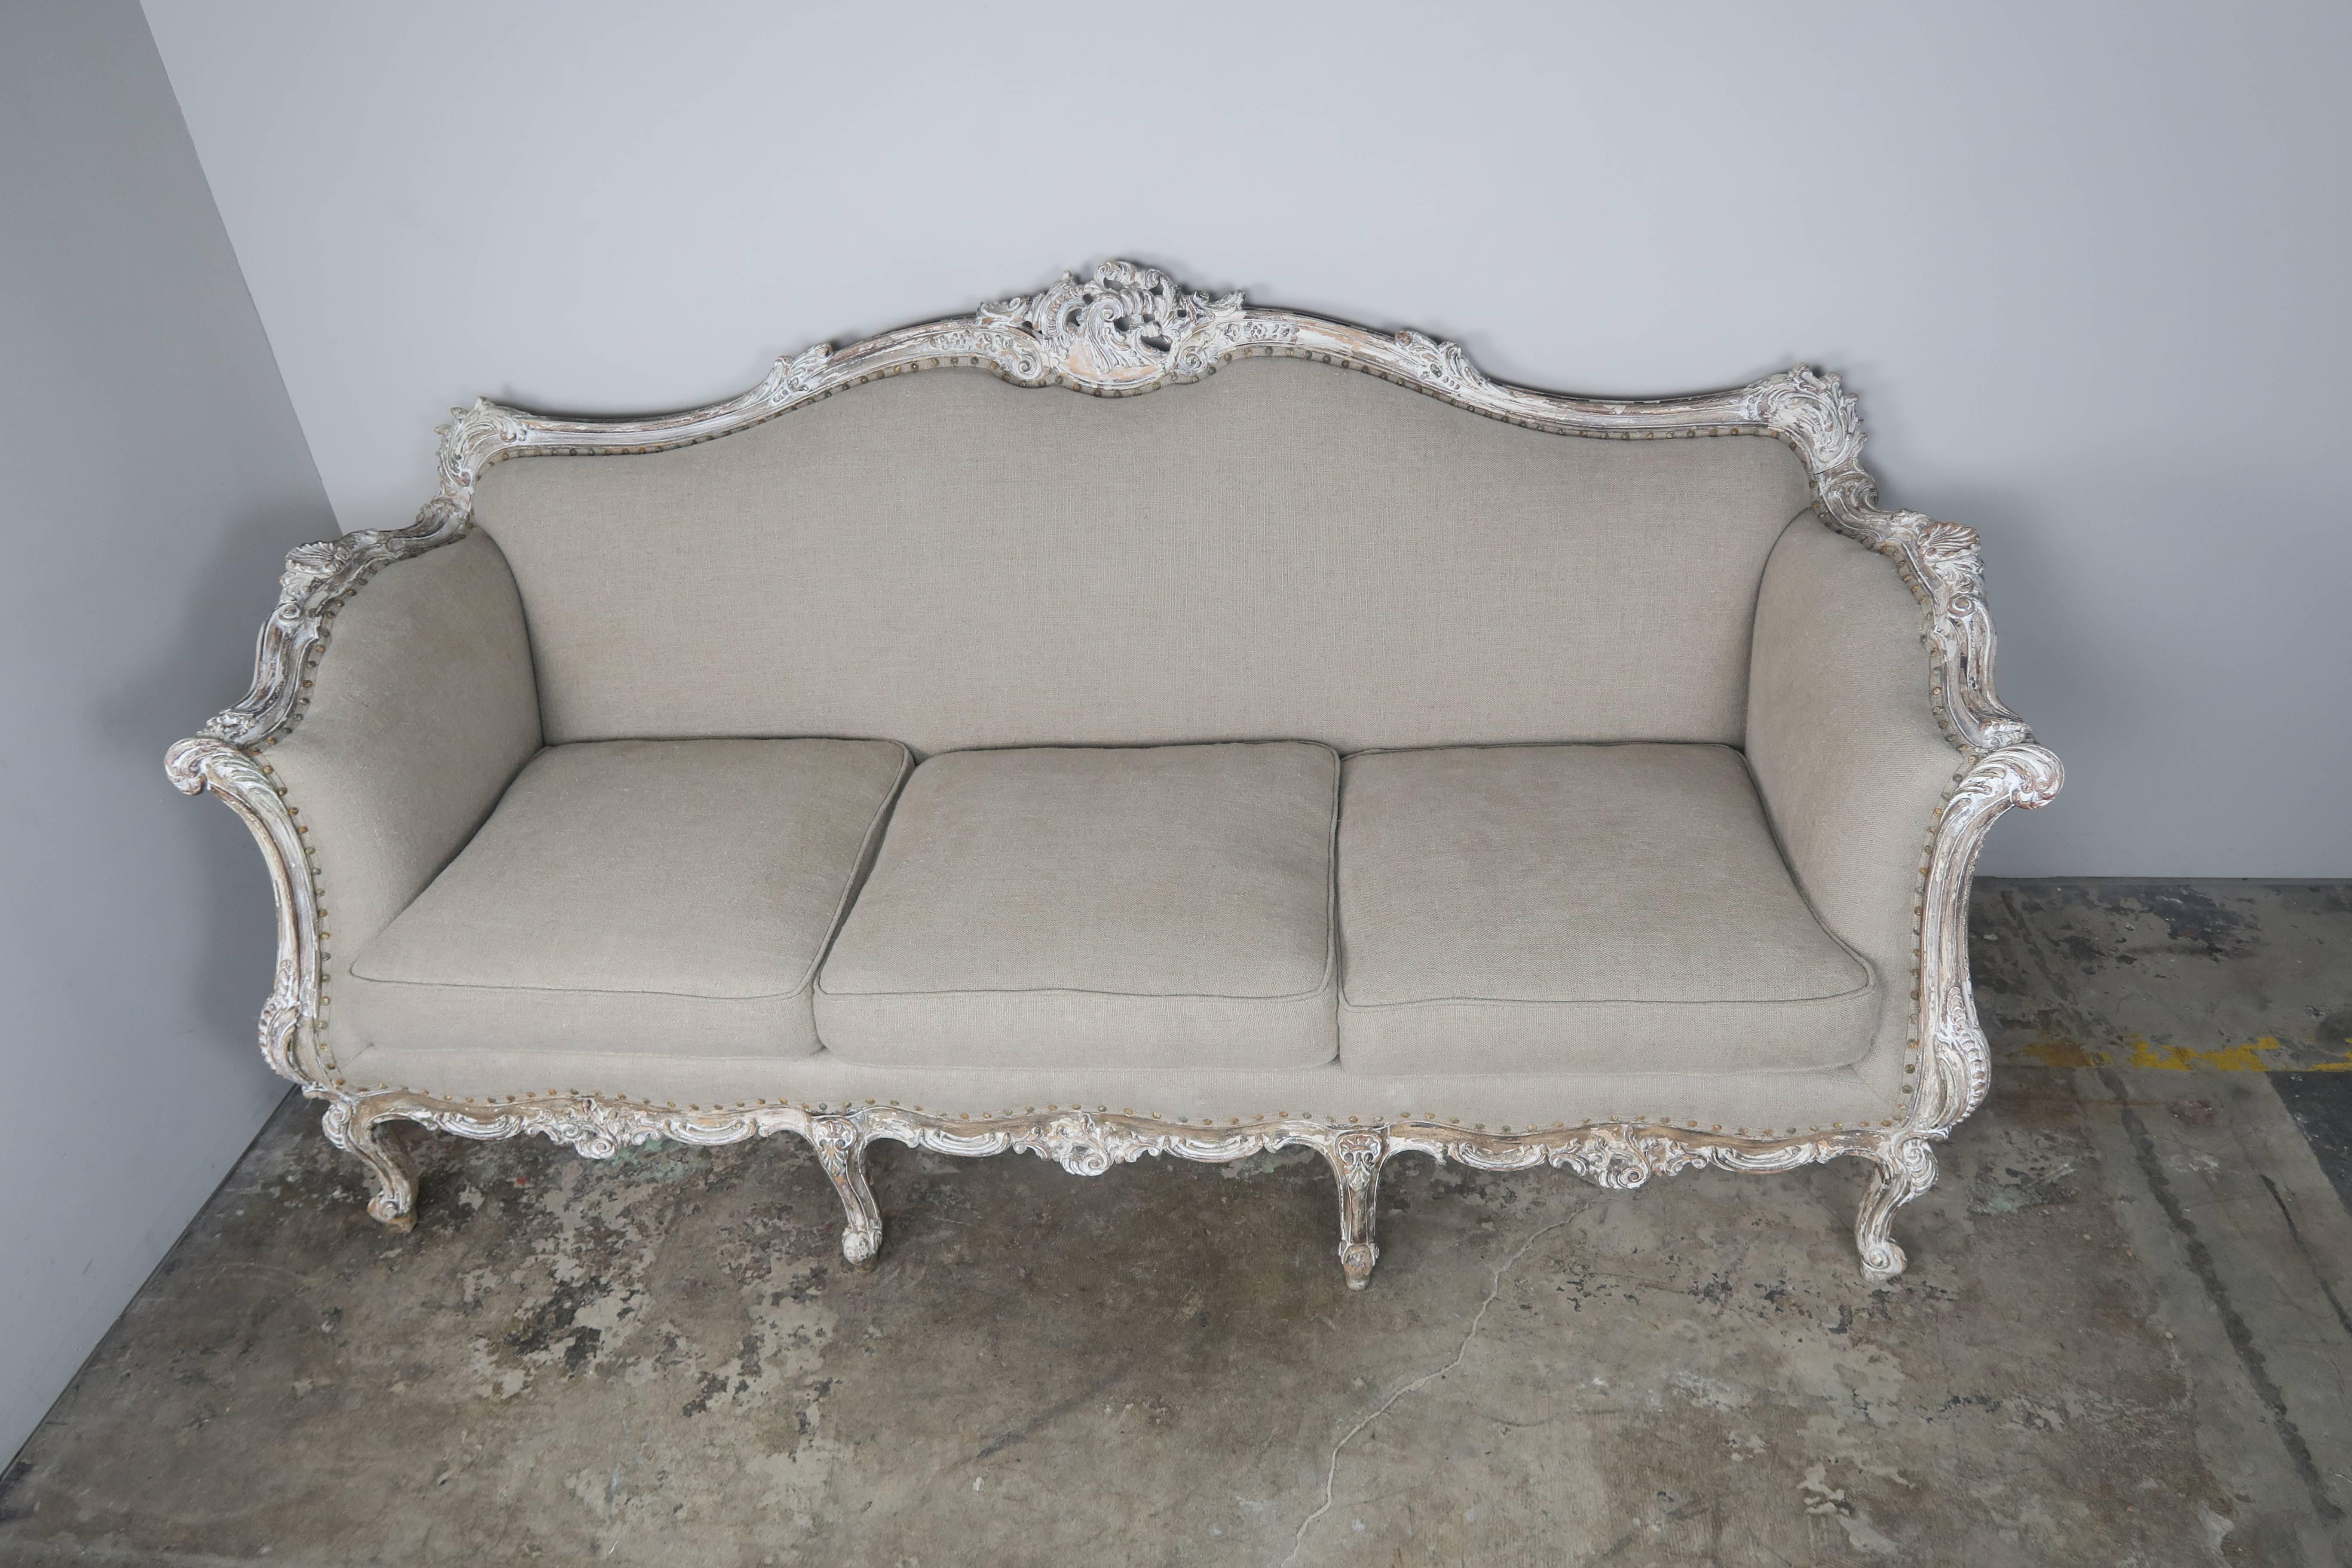 French Rococo style painted sofa standing on eight cabriole legs with ram's head feet. Worn antique white painted finish. The sofa is newly upholstered in a natural Belgium style linen with original nailhead trim detail. Three envelope cushions with